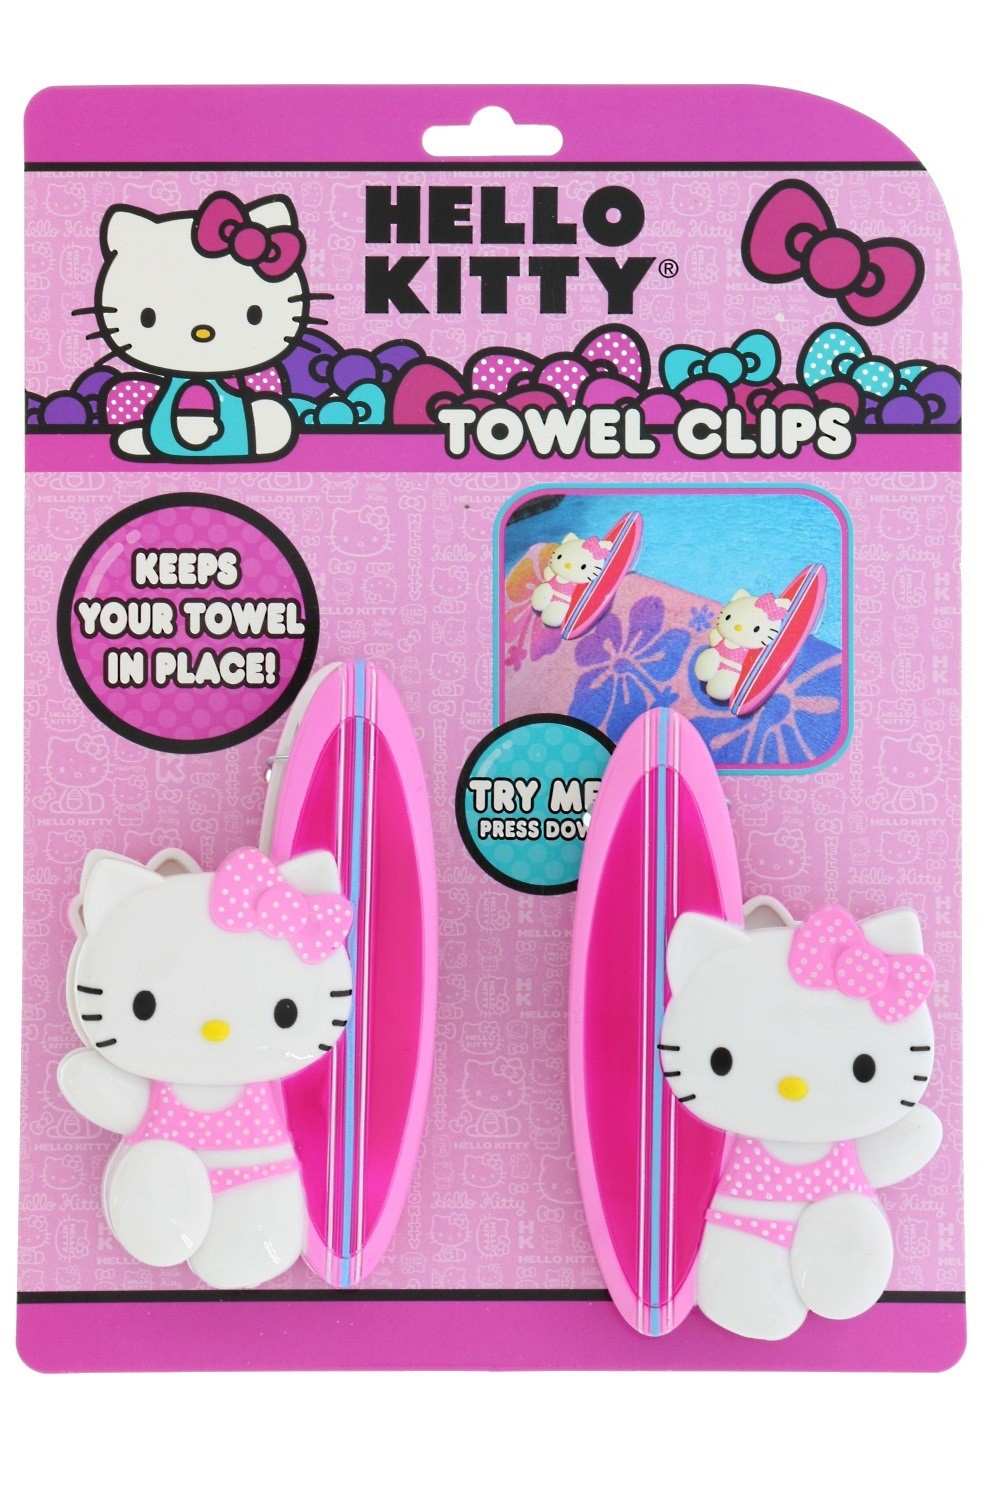 Hello Kitty Towel Clip Wholesale, (2 - Pack) - image 2 of 4